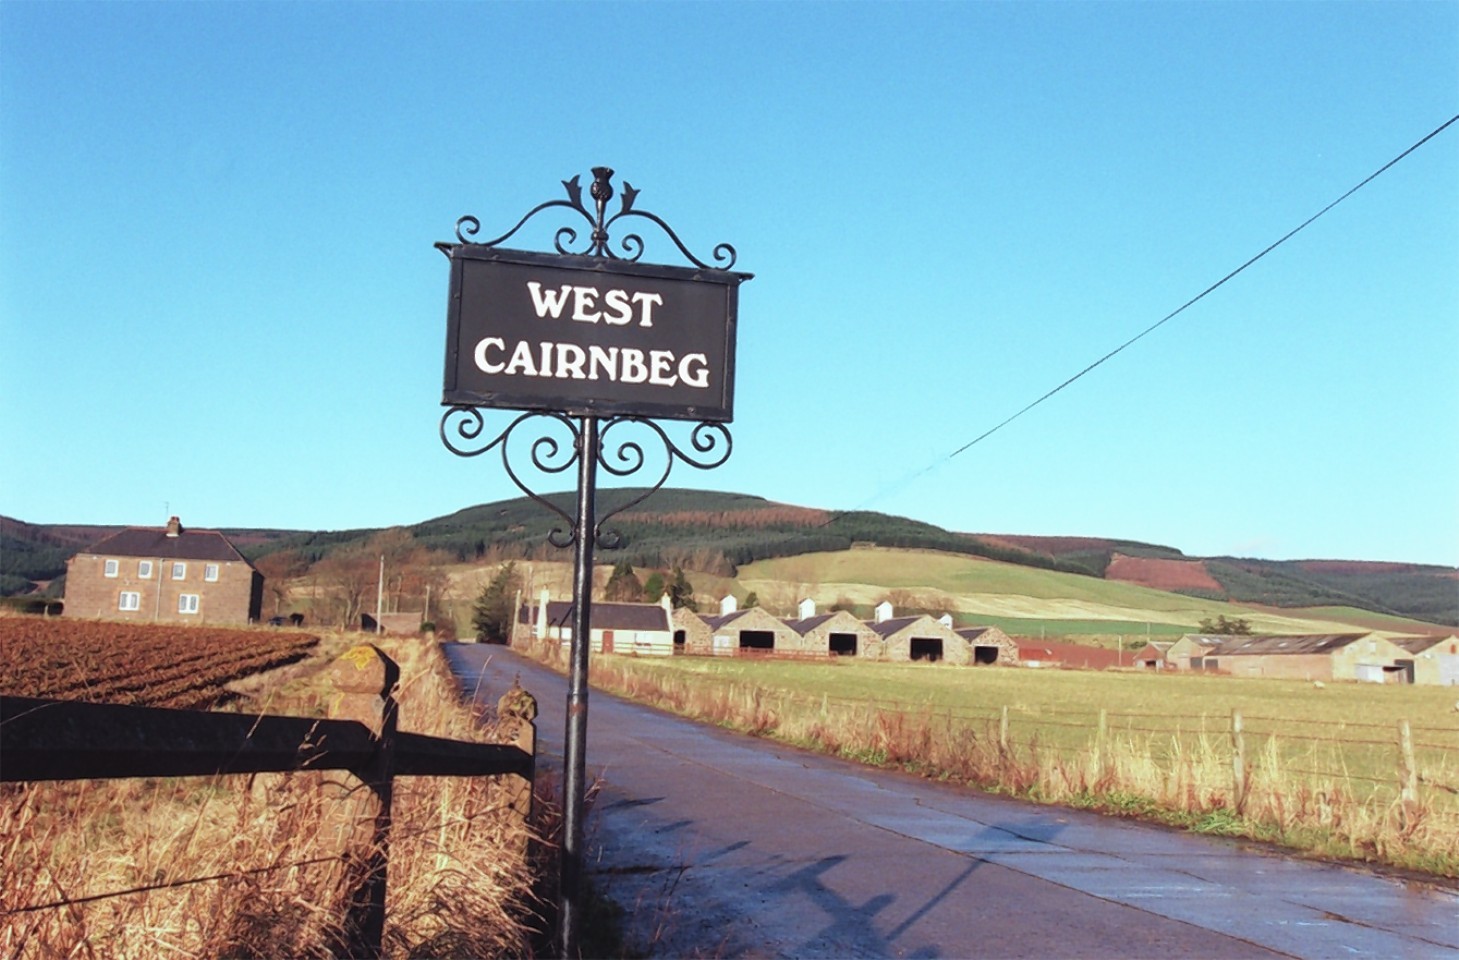 West Cairnbeg, the scene of one of the north-east's most notorious murders